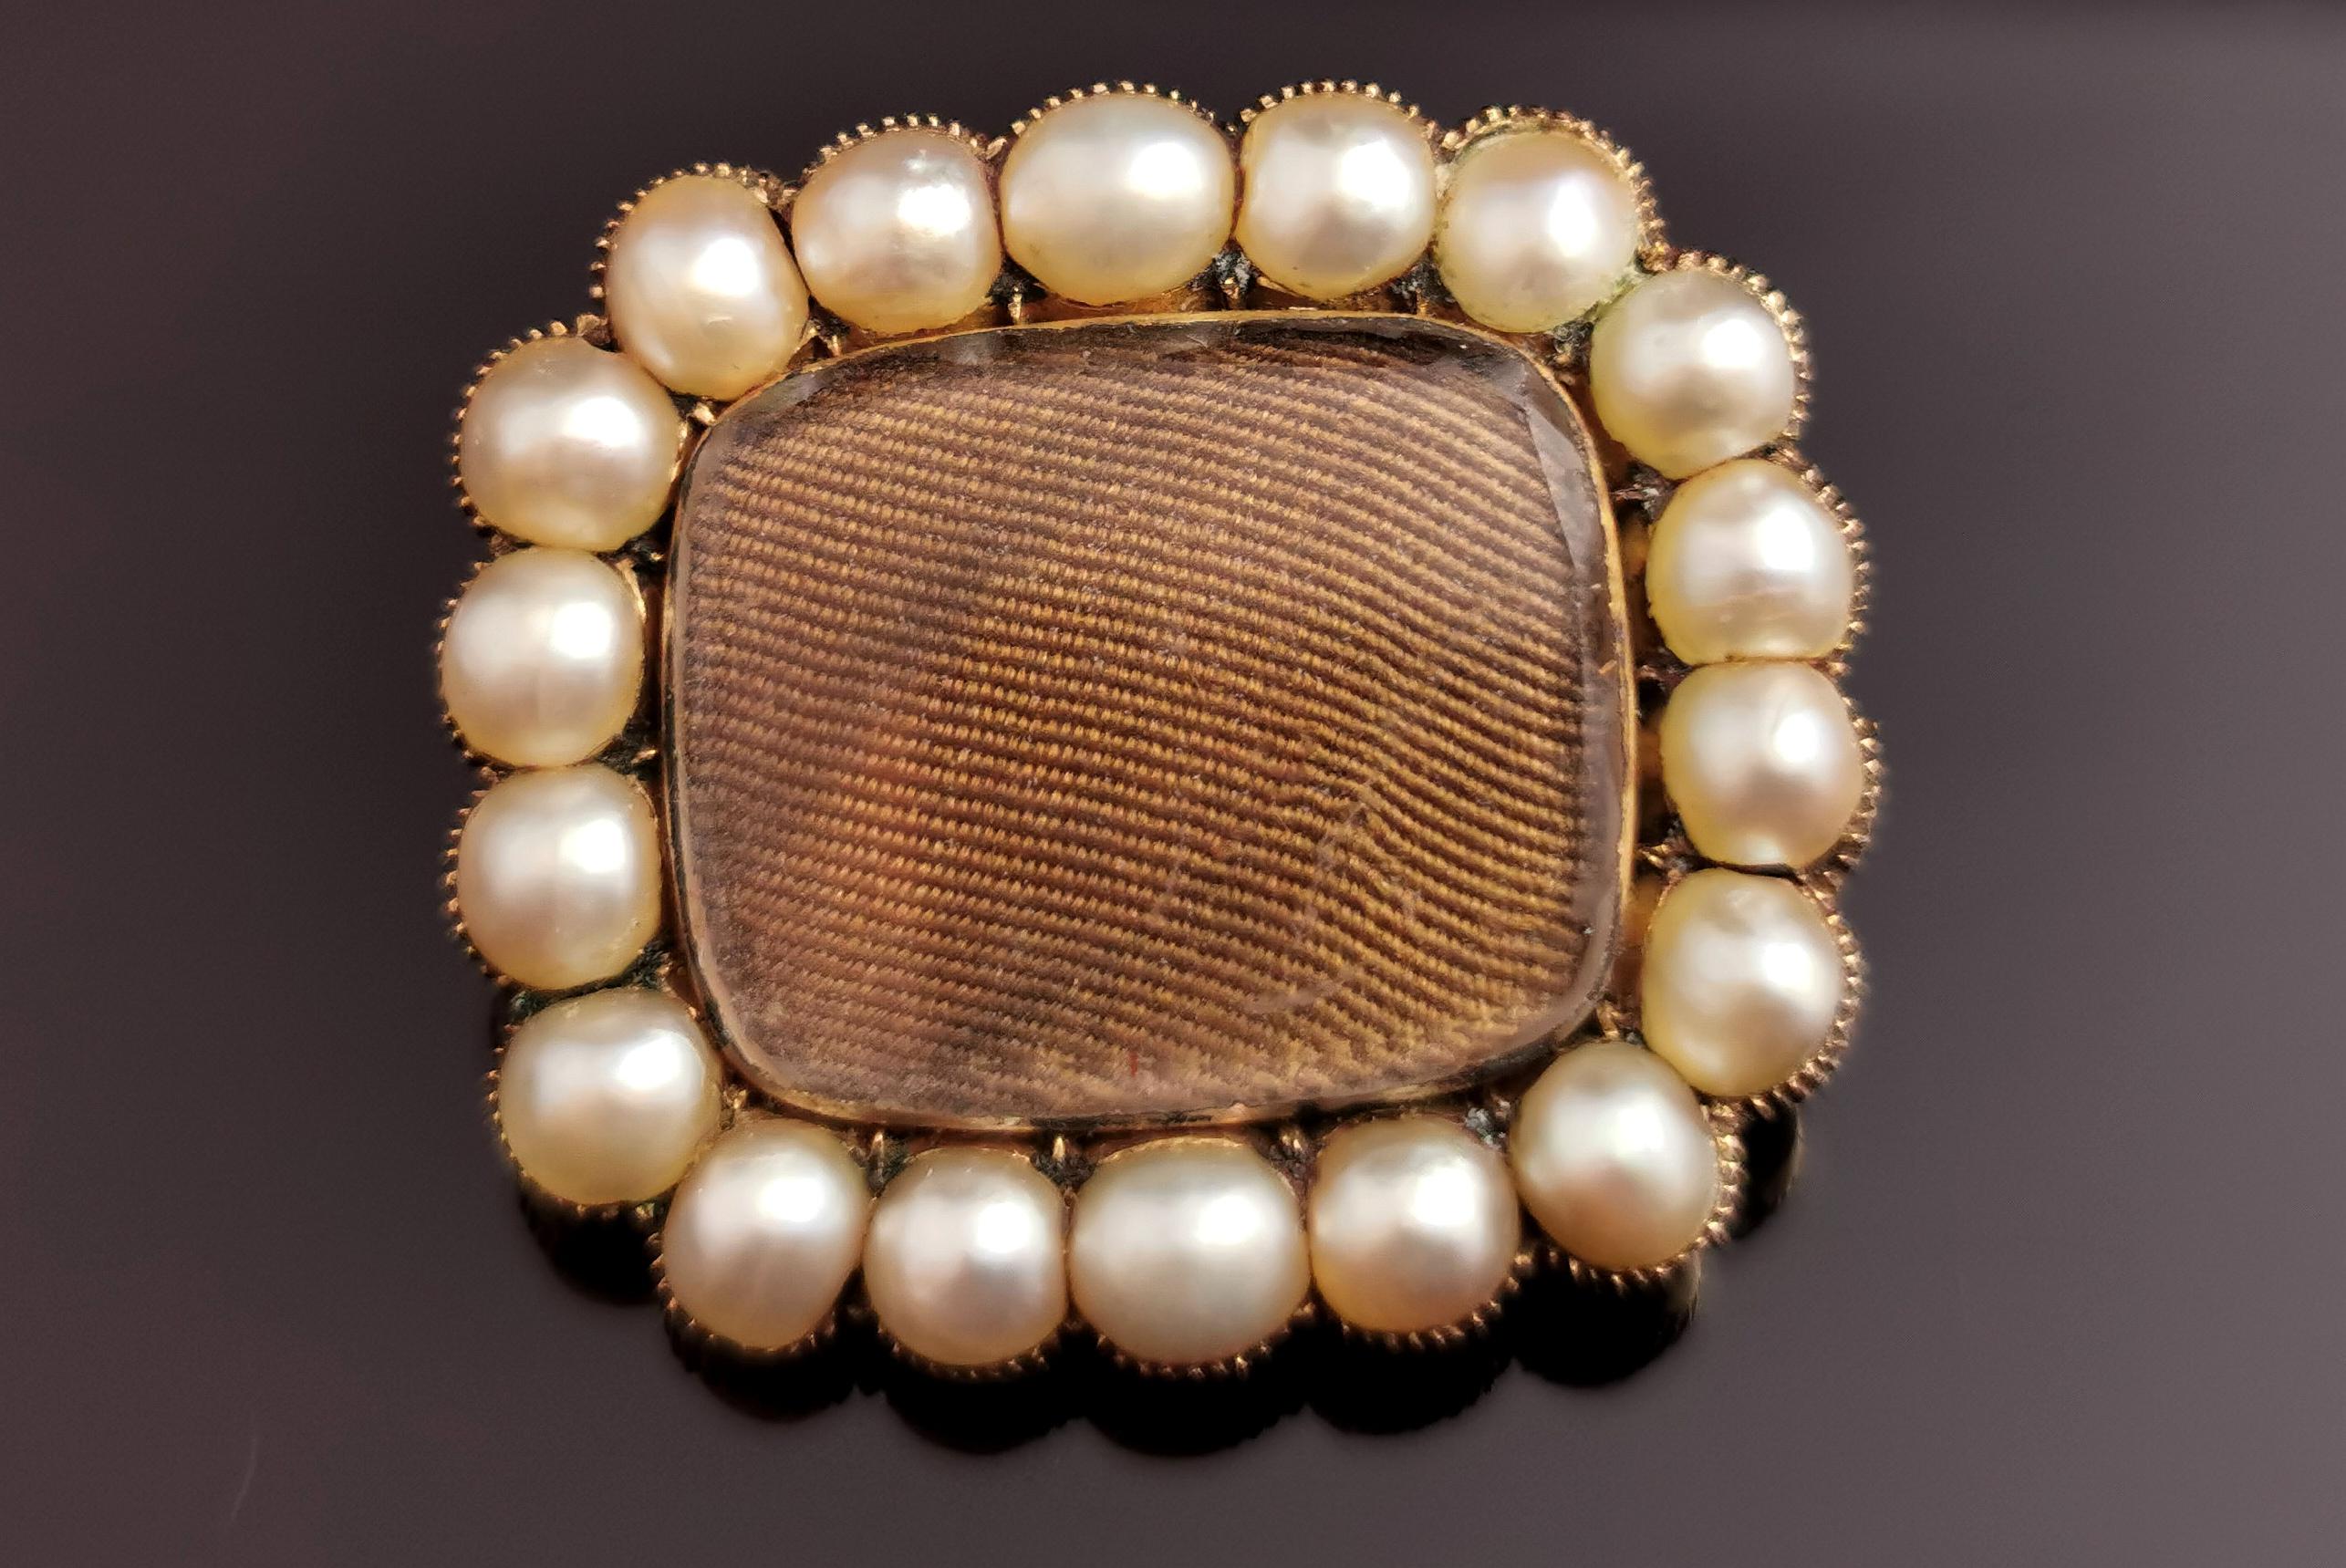 A beautiful antique Victorian mourning brooch.

Early to mid Victorian this brooch is a rounded rectangular shape with a glazed front compartment enclosing very tightly woven light brown hair.

It has a border of creamy split pearls and is set in